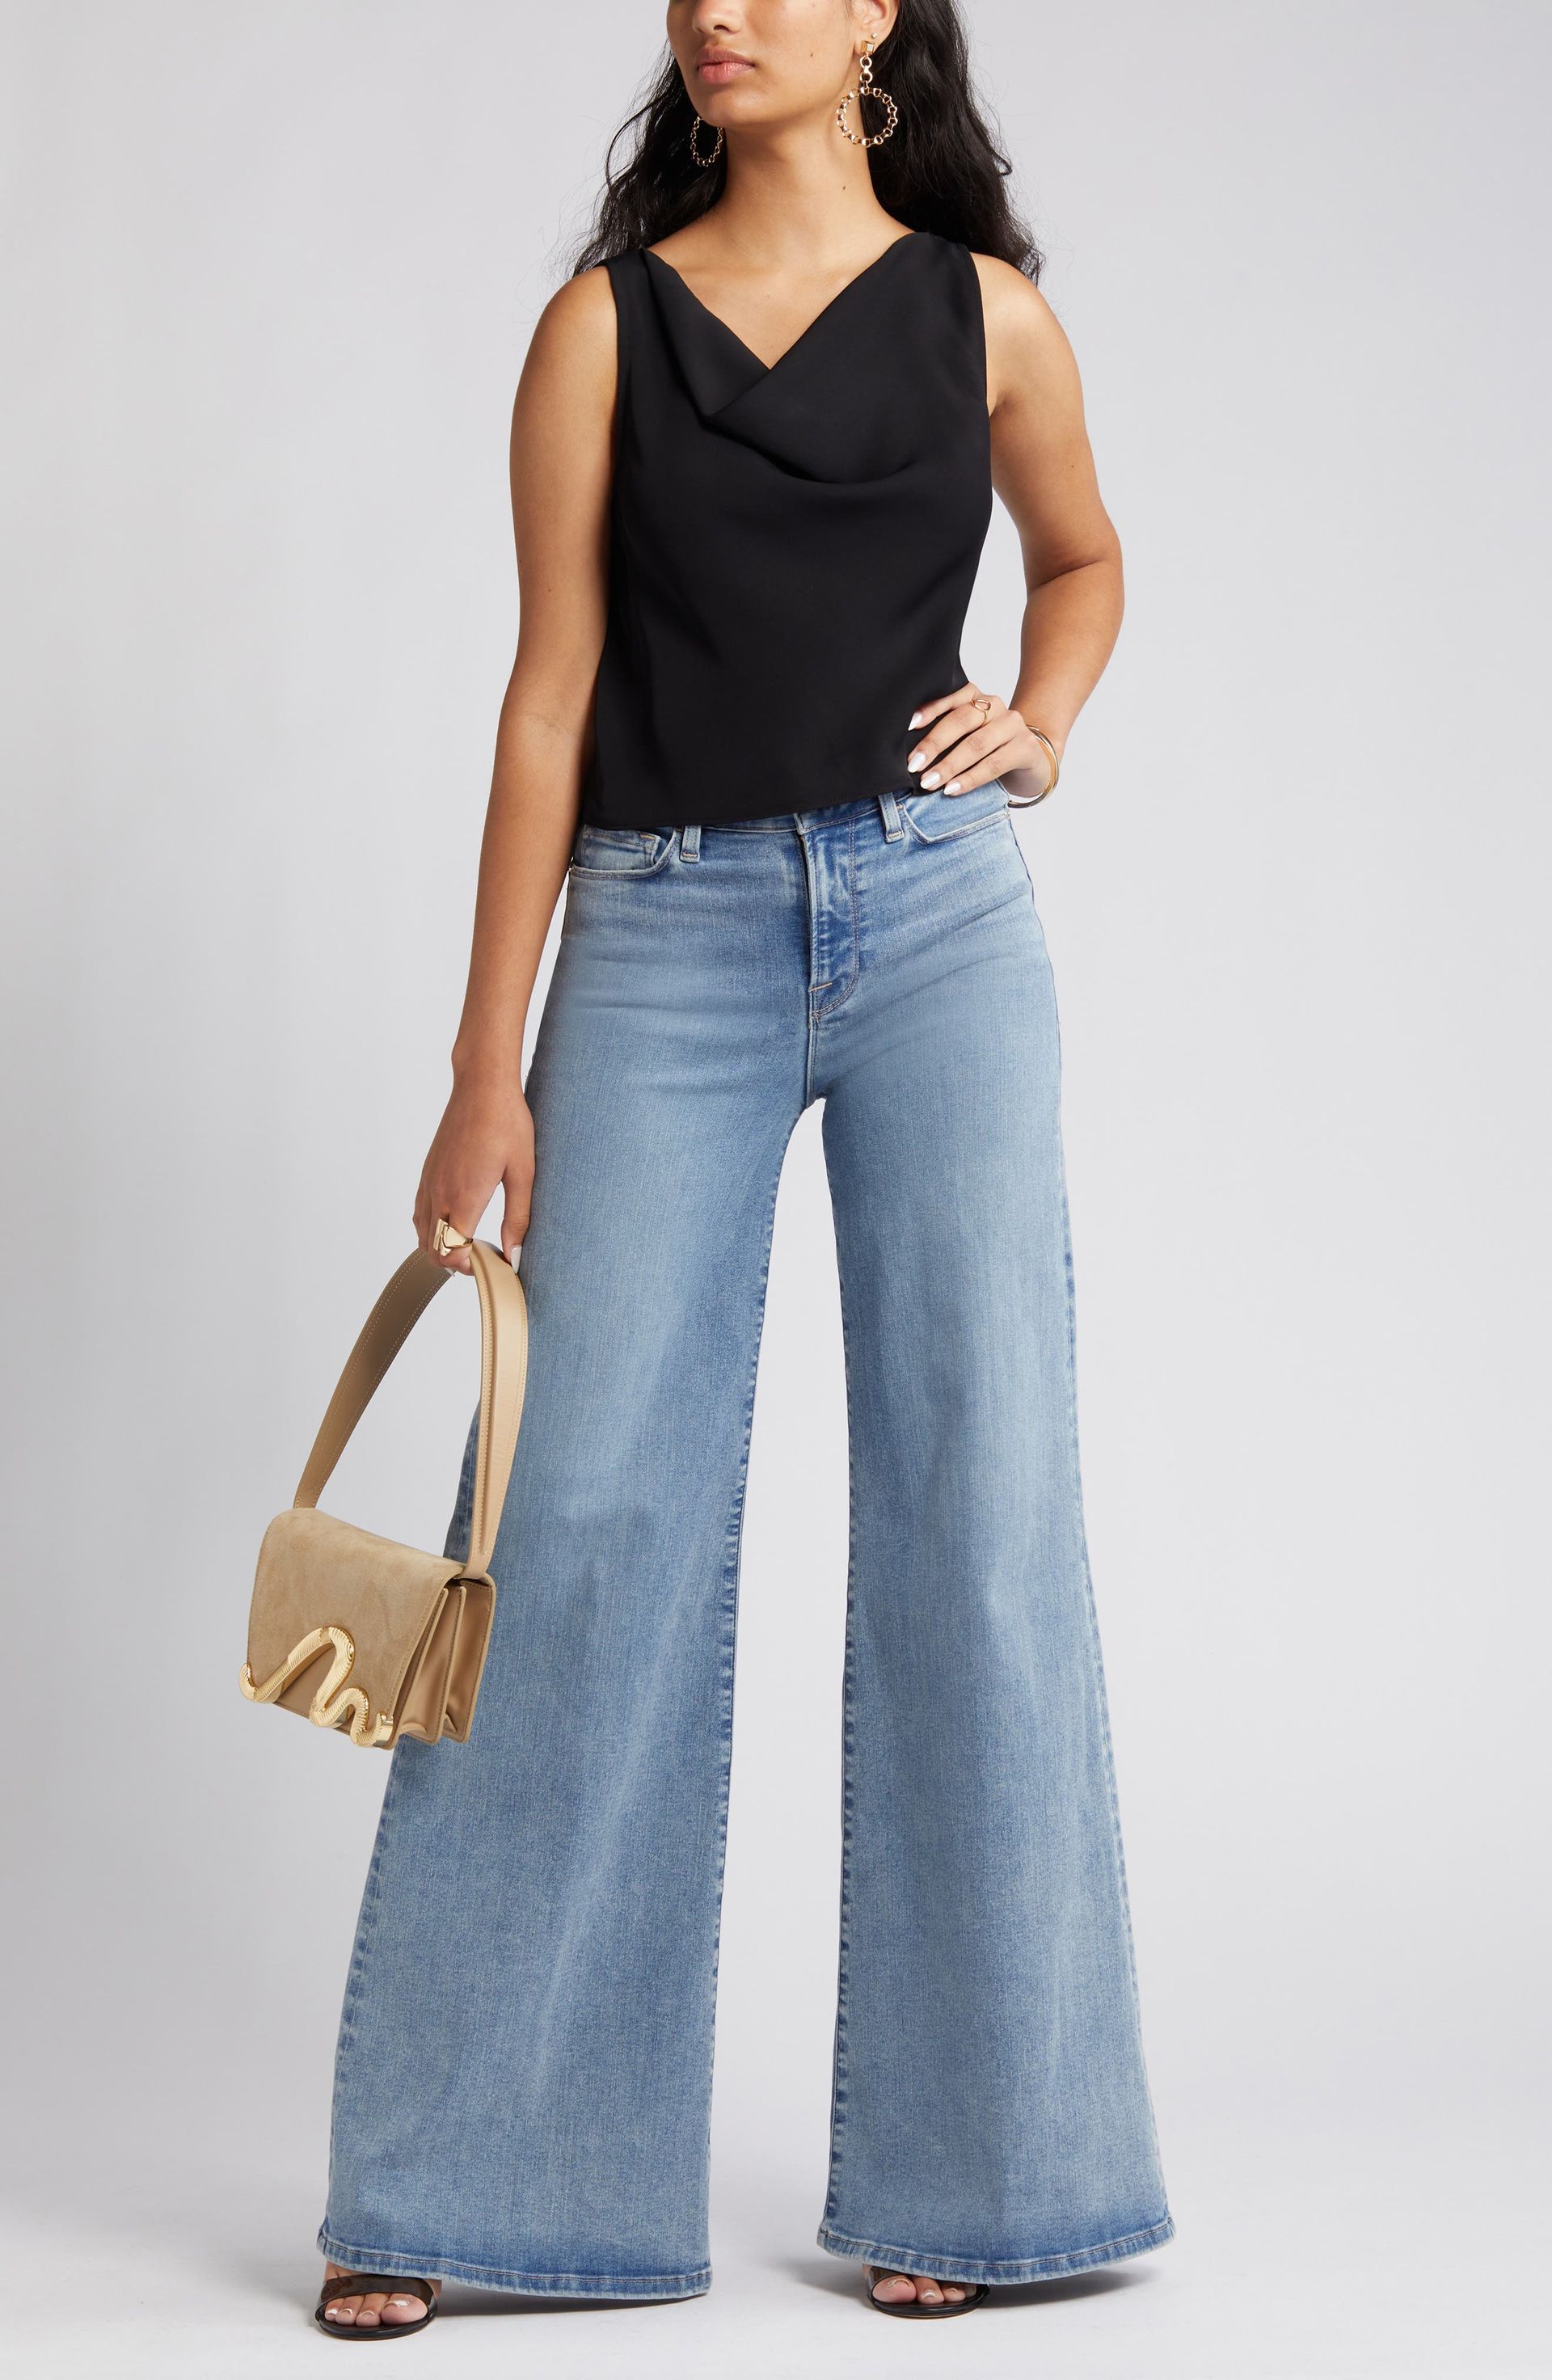 30 of the Best Basics, Shoes, and Accessories at Nordstrom | Who What Wear